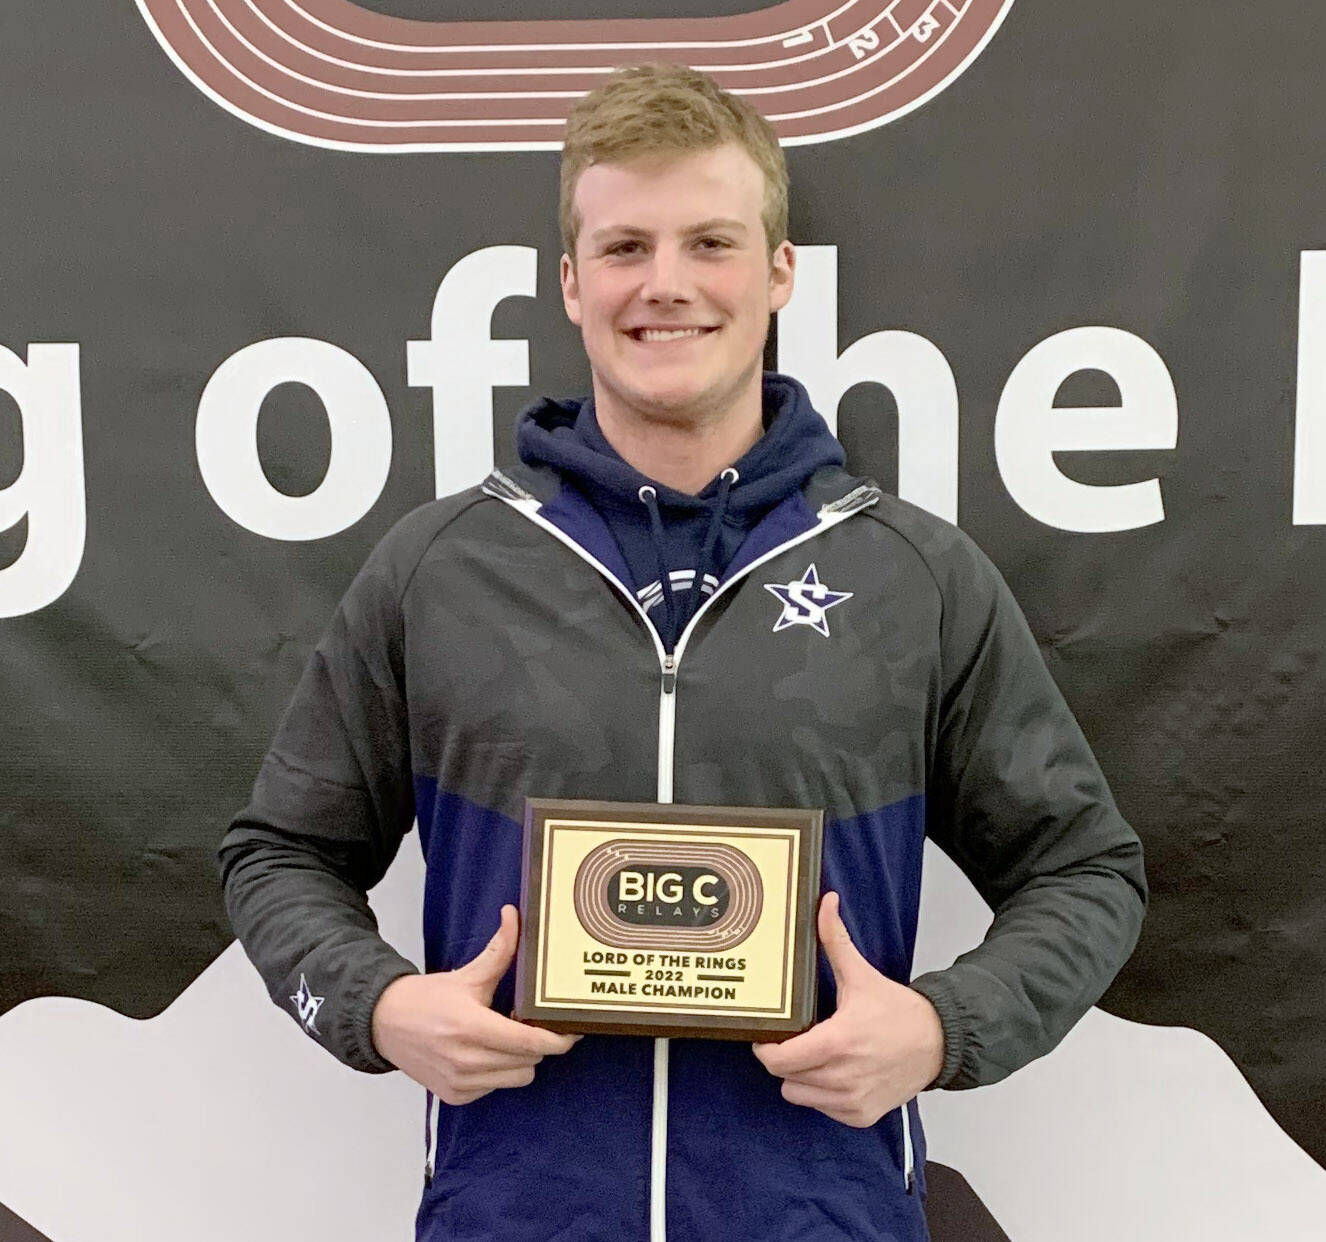 Soldotna’s Dylan Dahlgren won the Lord of the Rings title Saturday, April 9, 2022, at the Big C Relays at The Dome in Anchorage, Alaska. (Photo provided)